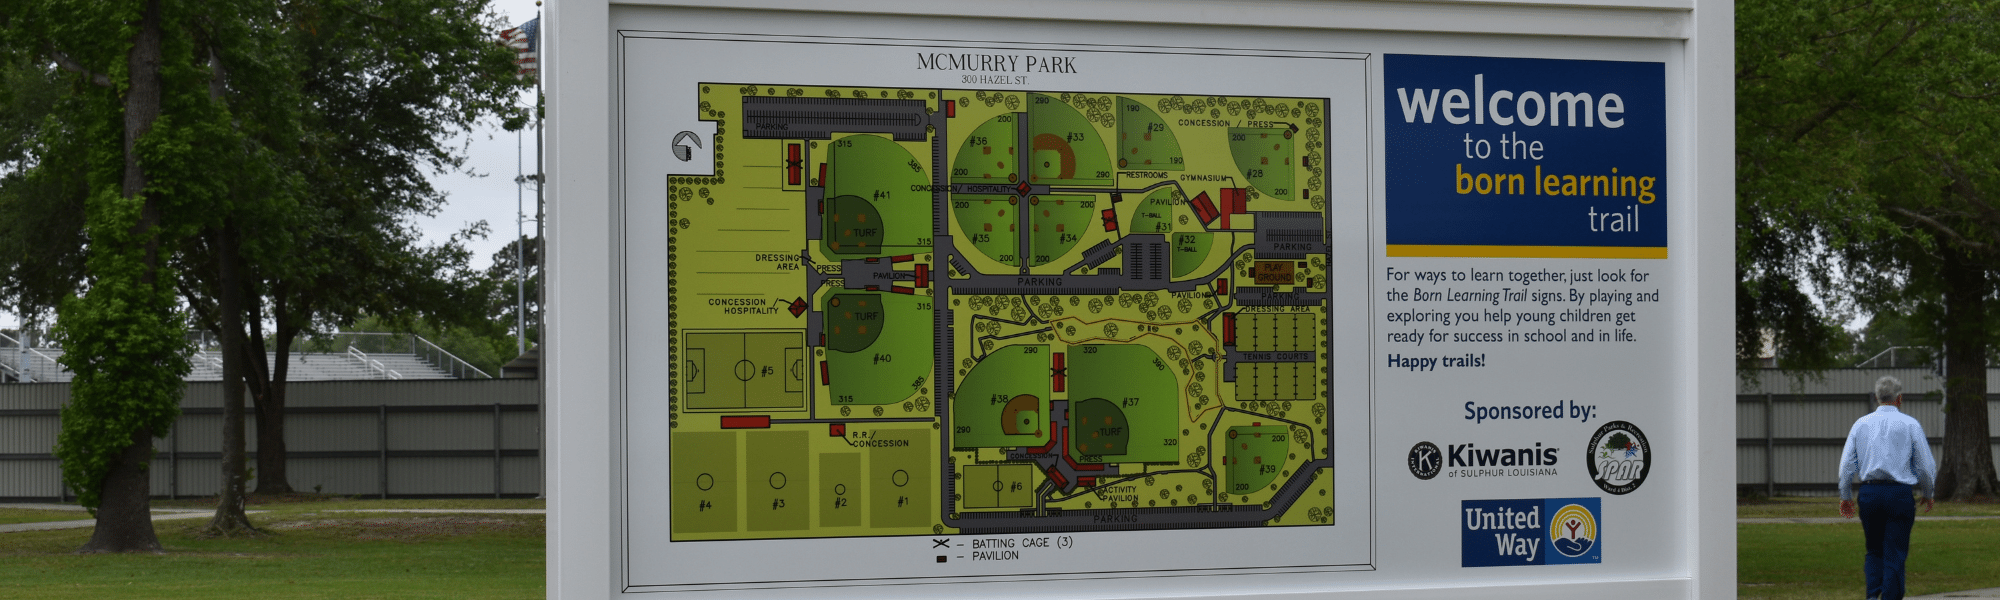 McMurray Park sign showing the trail